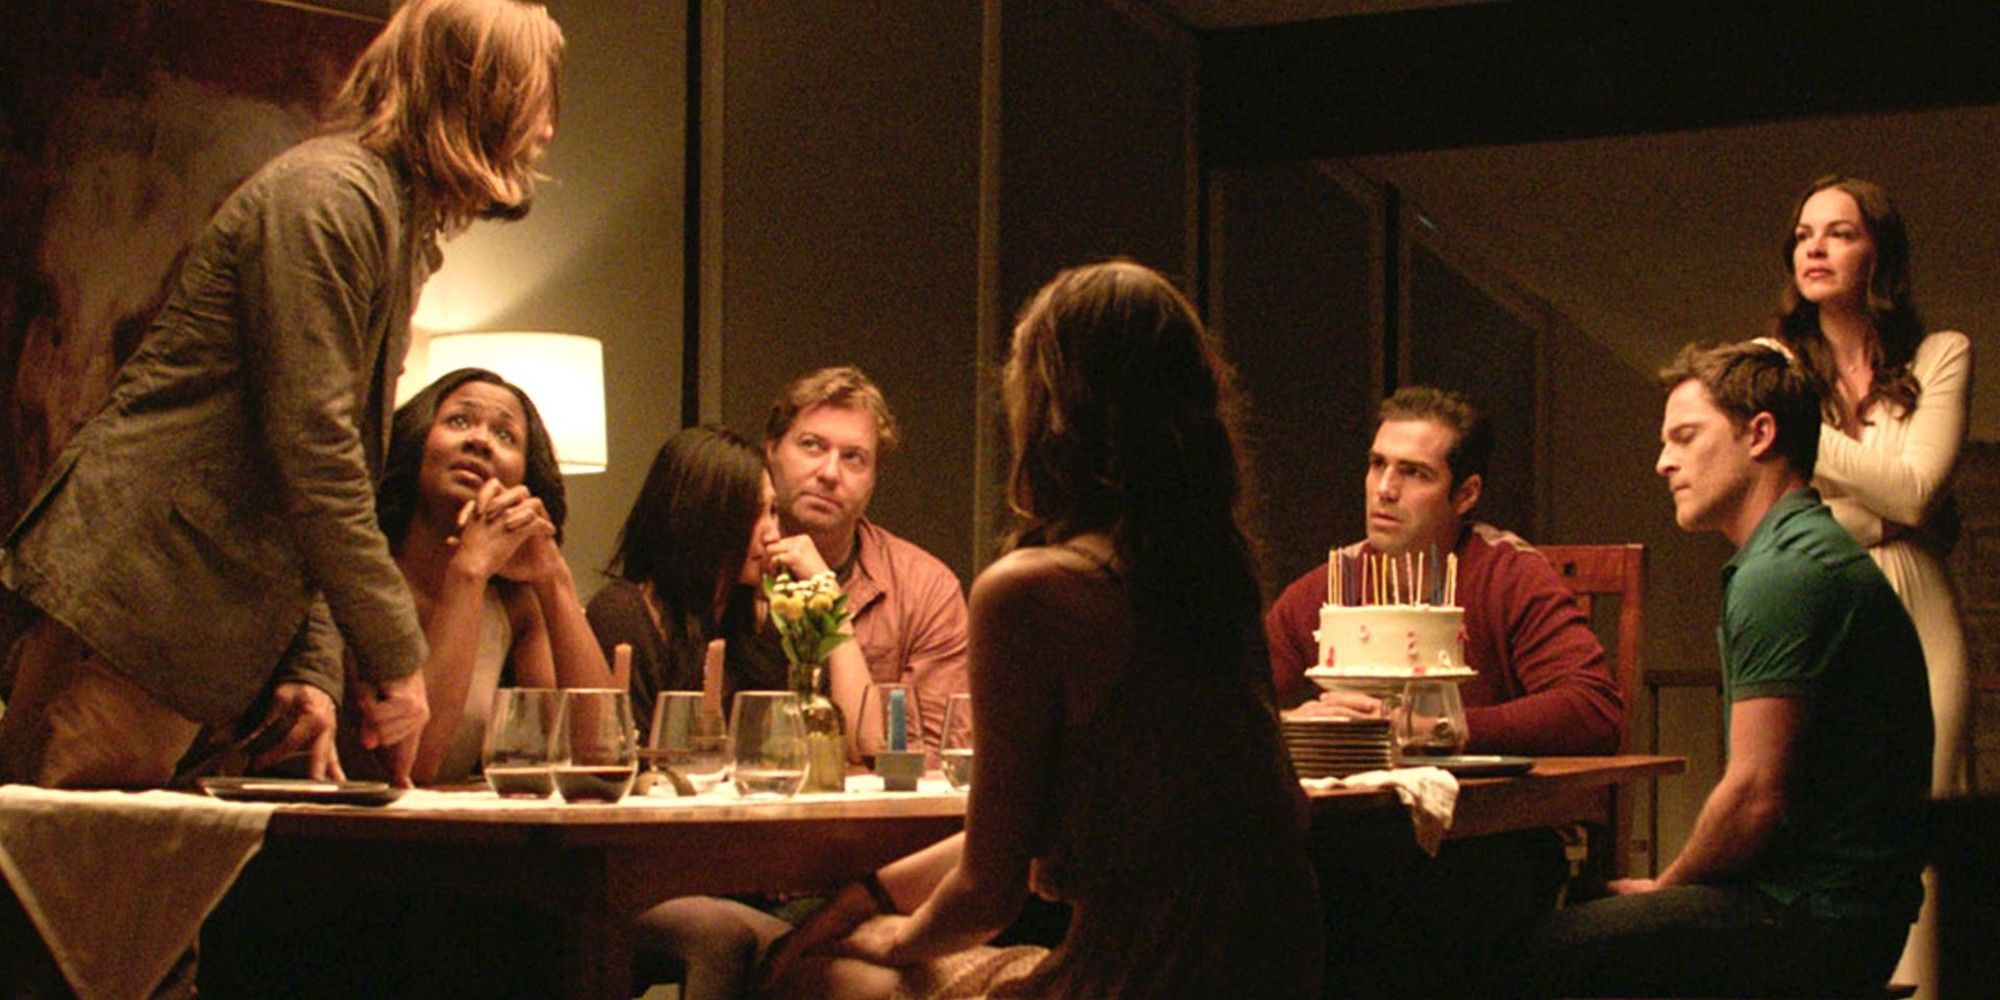 The Invitation cast, including Logan Marshall Green, gathered around the dinner table